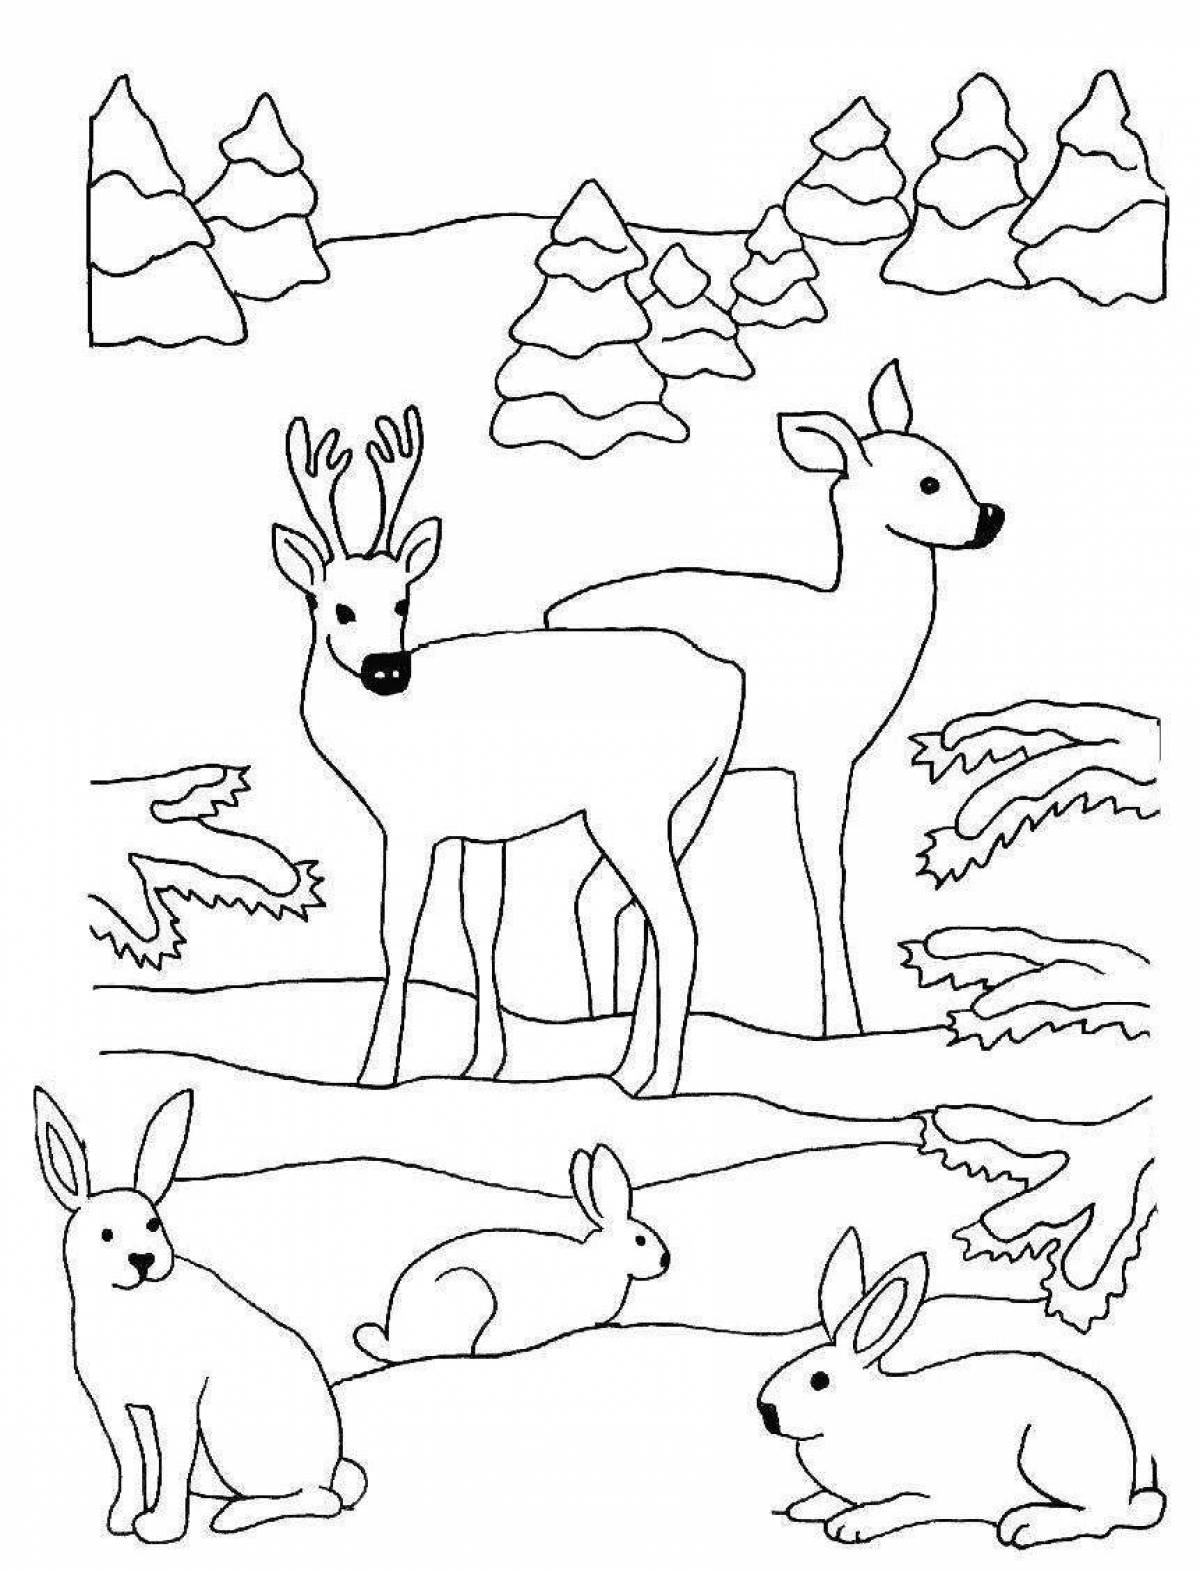 Animated coloring pages animals in winter